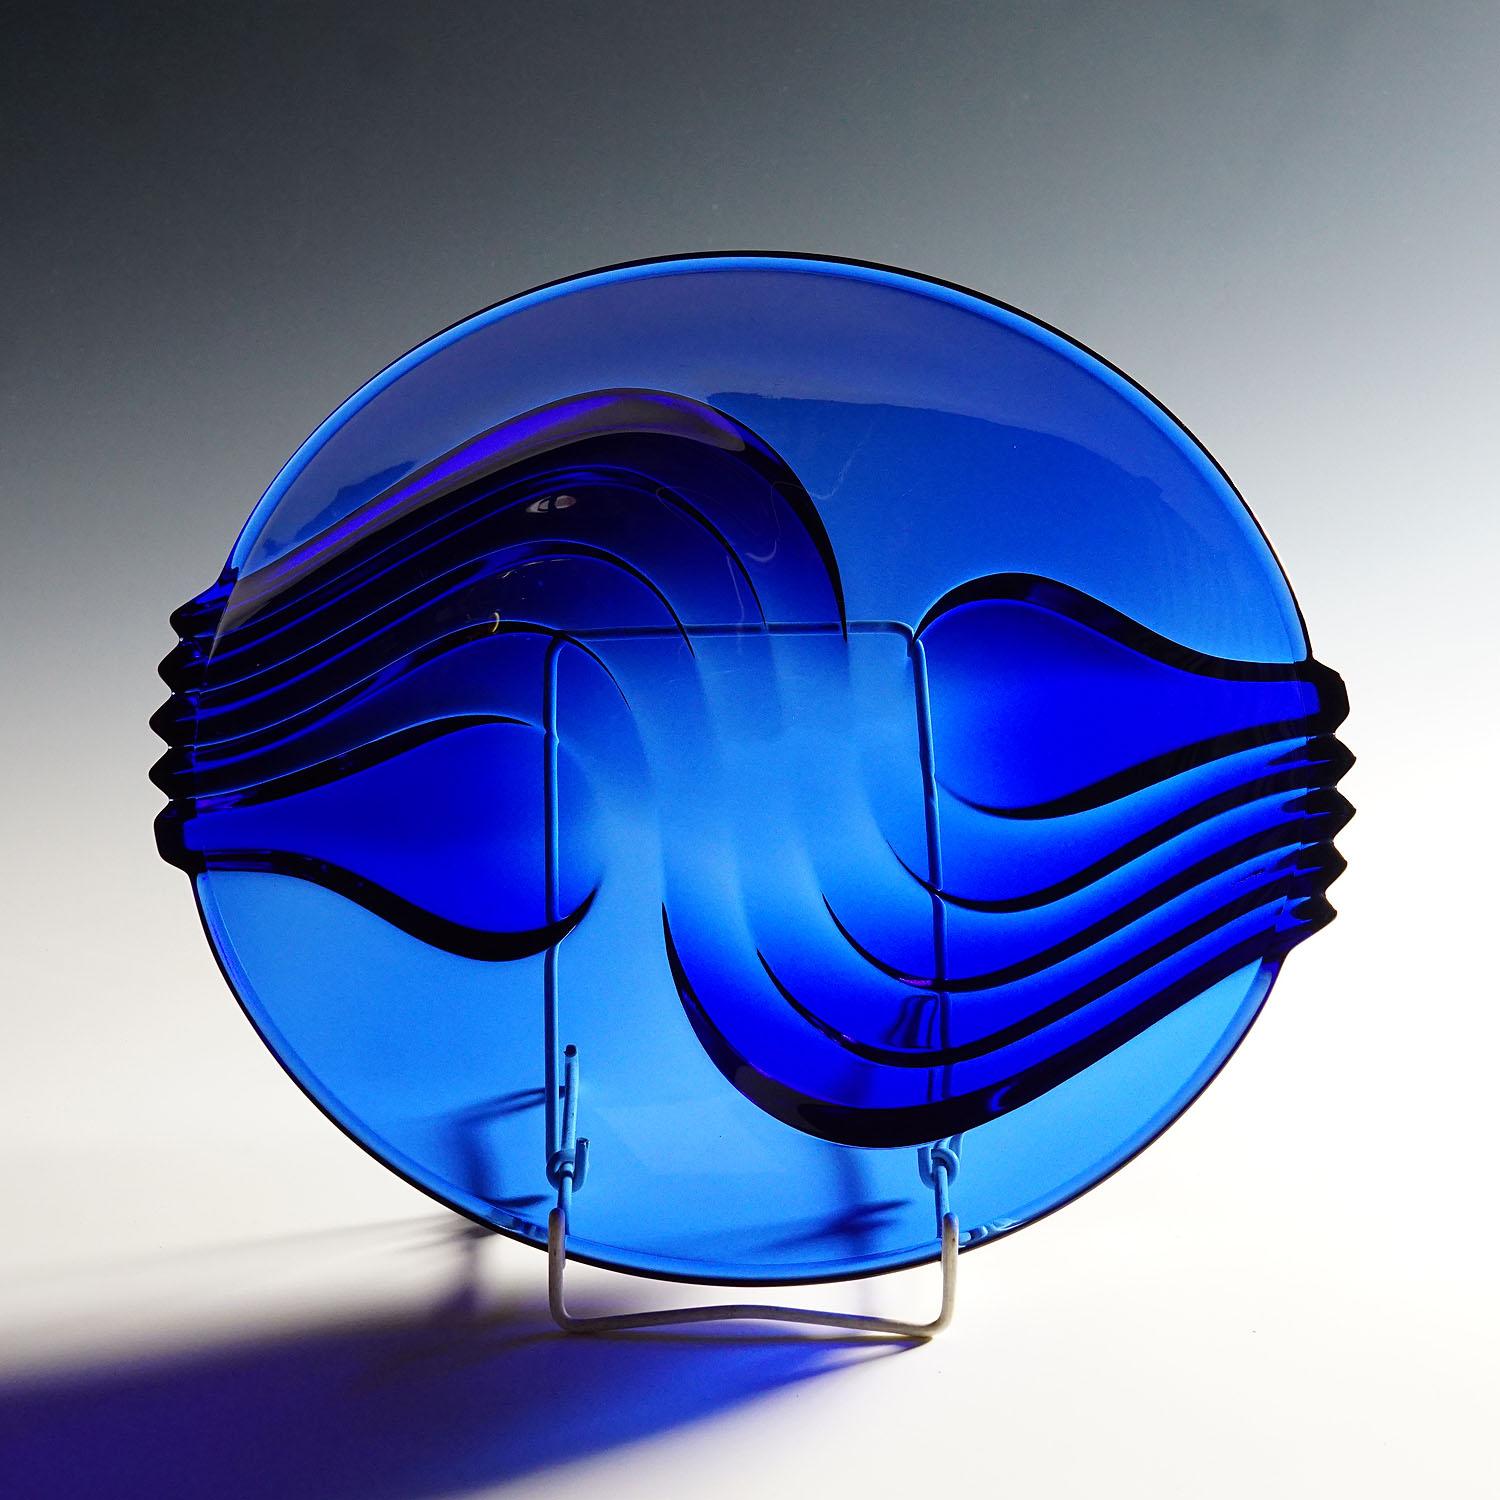 Vintage Cobalt blue glass plate by Arcoroc, France

A large pressed glass plate in cobalt blue glass. Manufactured by Arcoroc, France late 20th century. The bowl features a great decoration with undulating lines. Marked with hallmark 